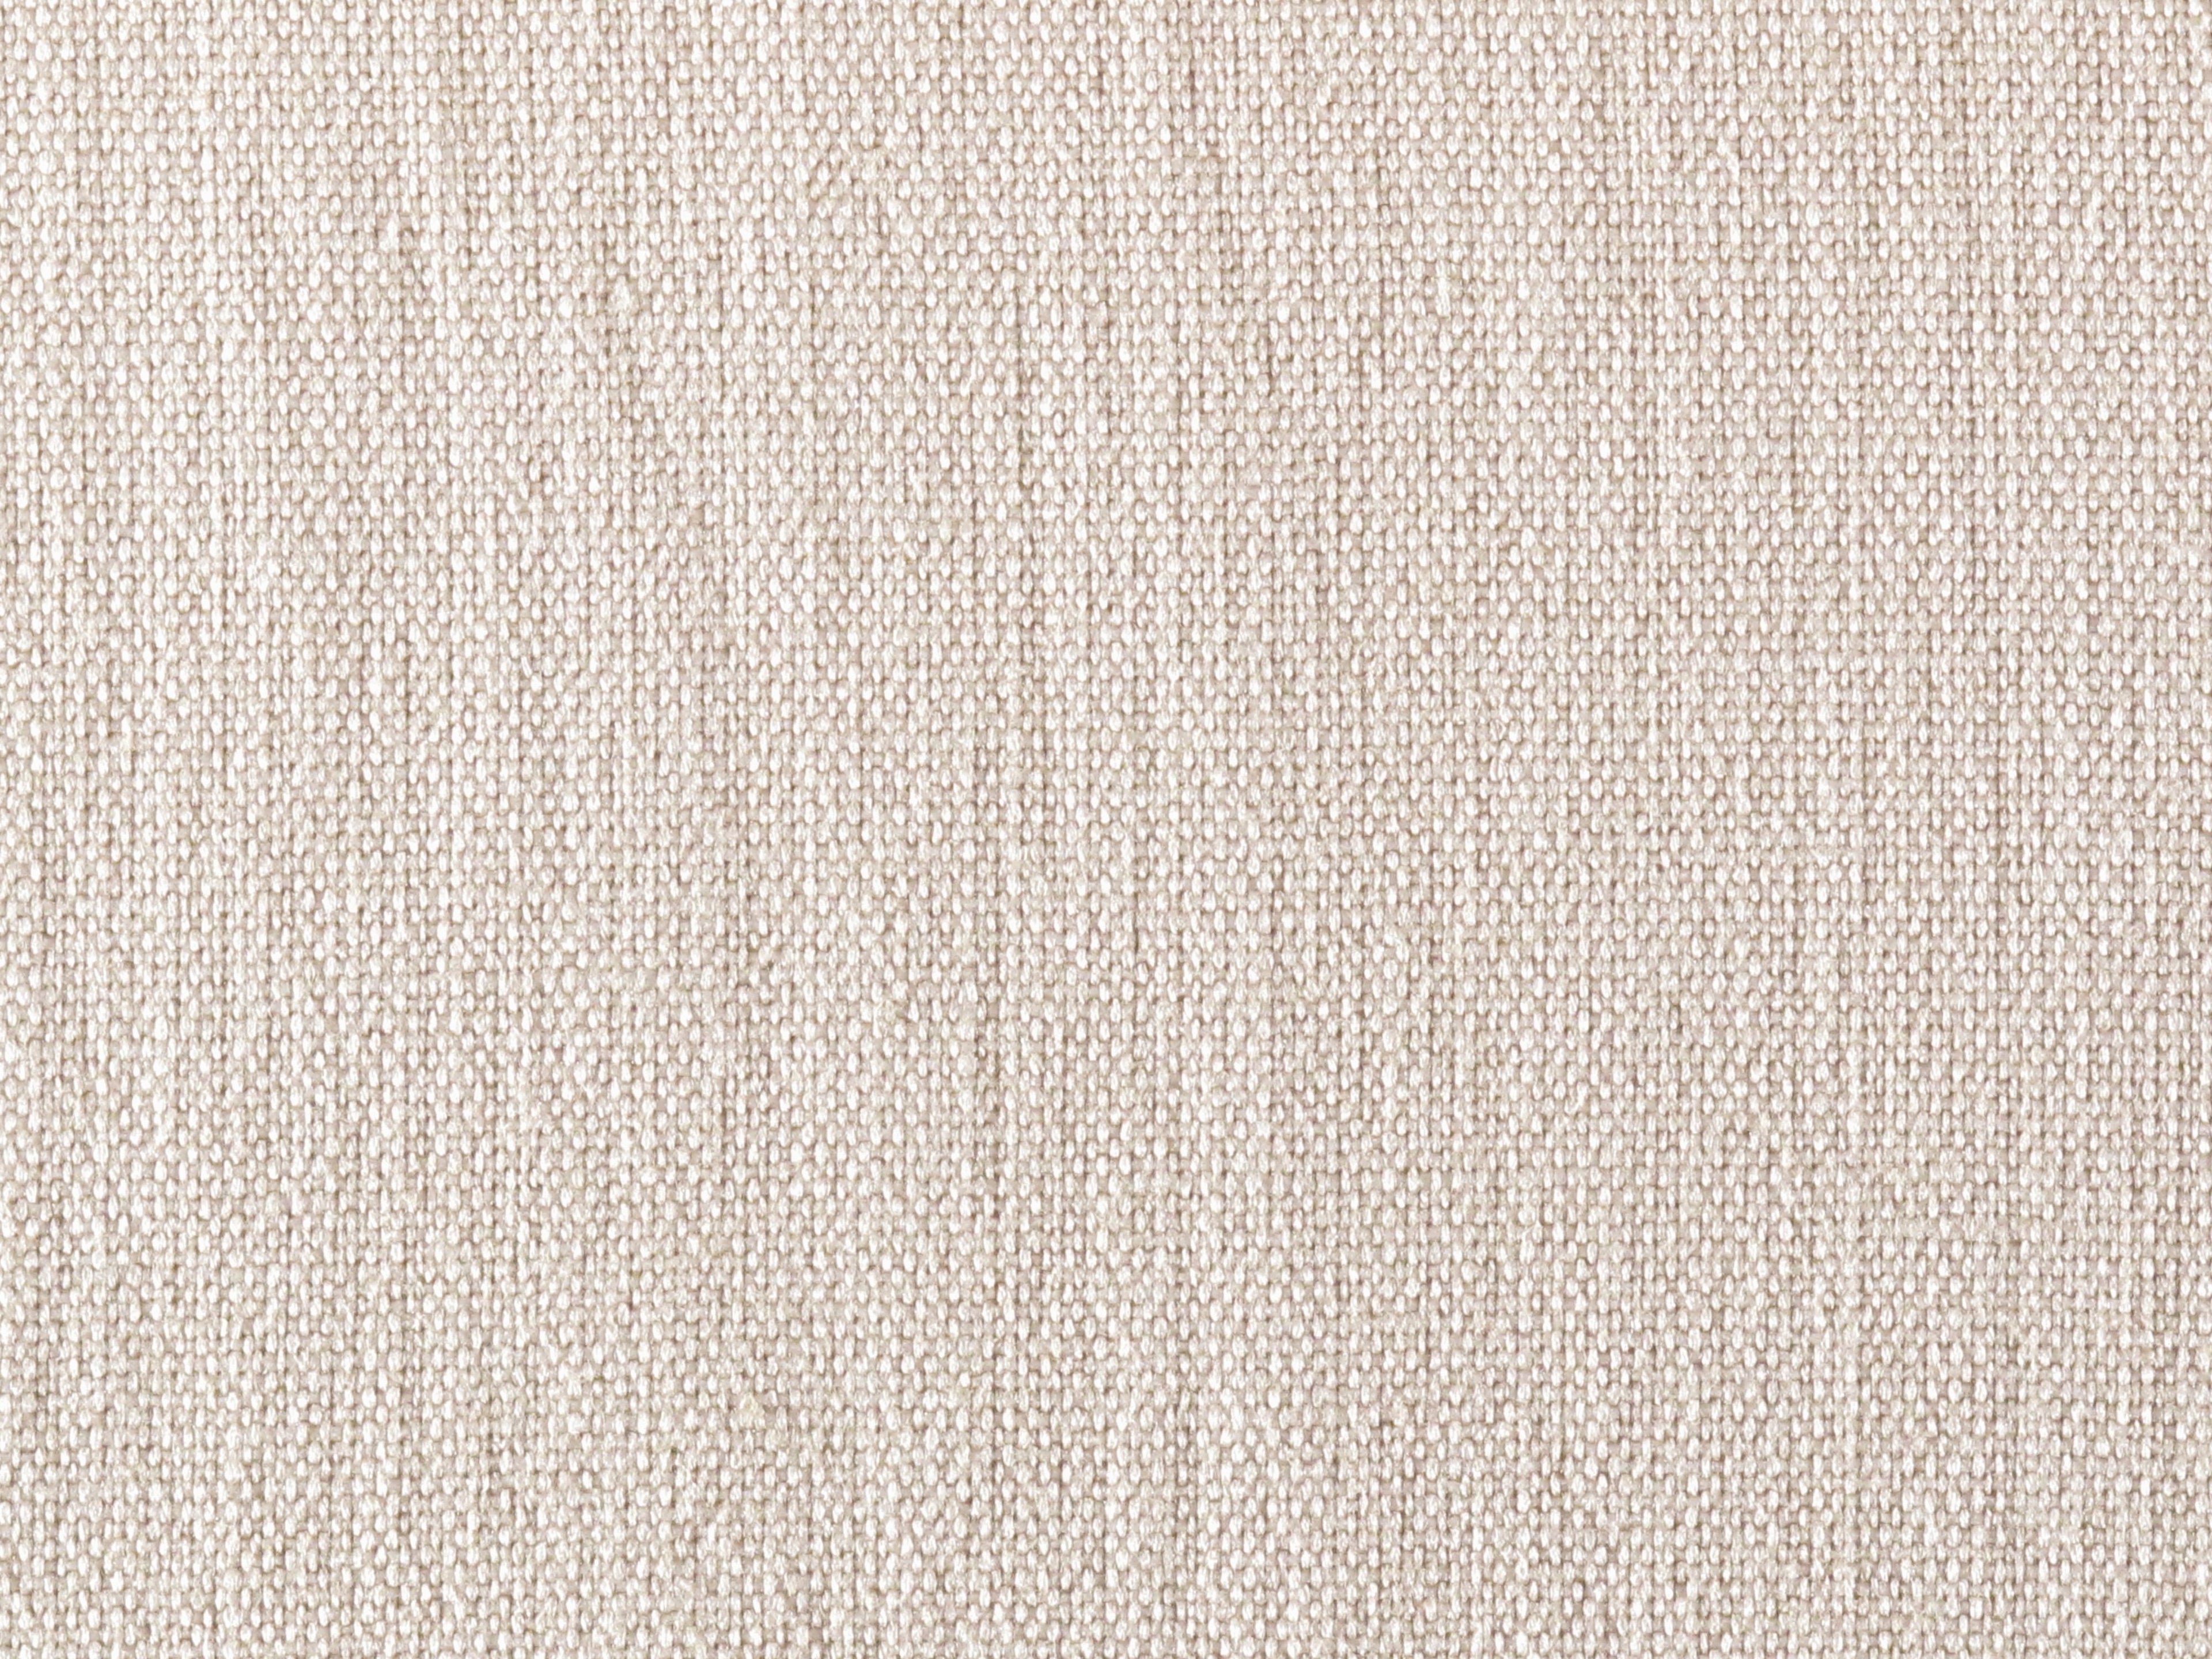 Lakeside Linen fabric in mushroom color - pattern number PK 0017LAKE - by Scalamandre in the Old World Weavers collection